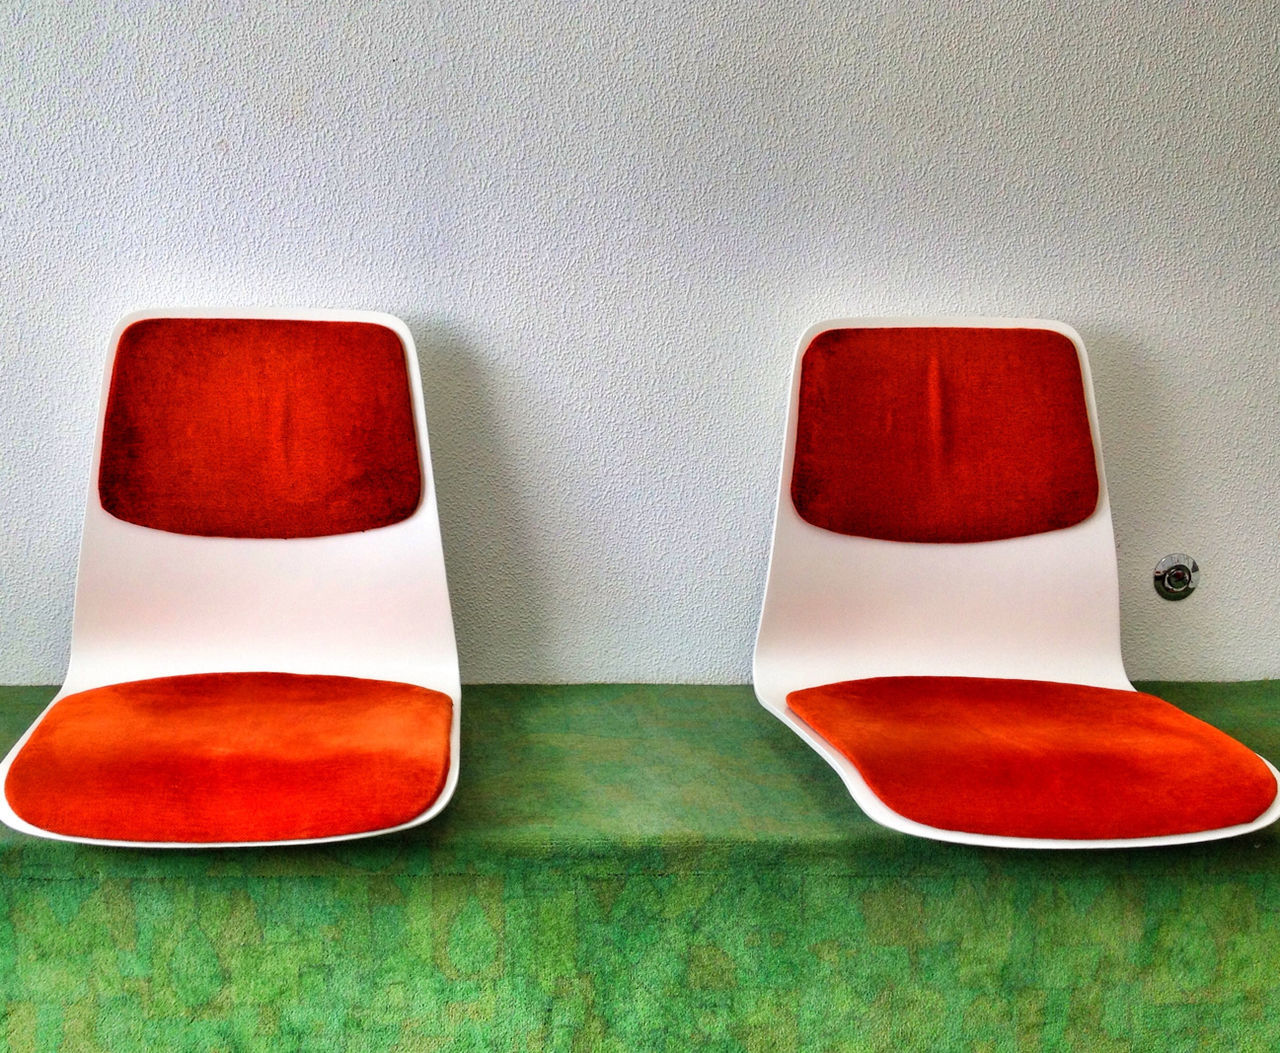 red, indoors, still life, absence, chair, table, empty, seat, no people, wall - building feature, close-up, high angle view, side by side, green color, white color, two objects, floor, flooring, wall, shoe